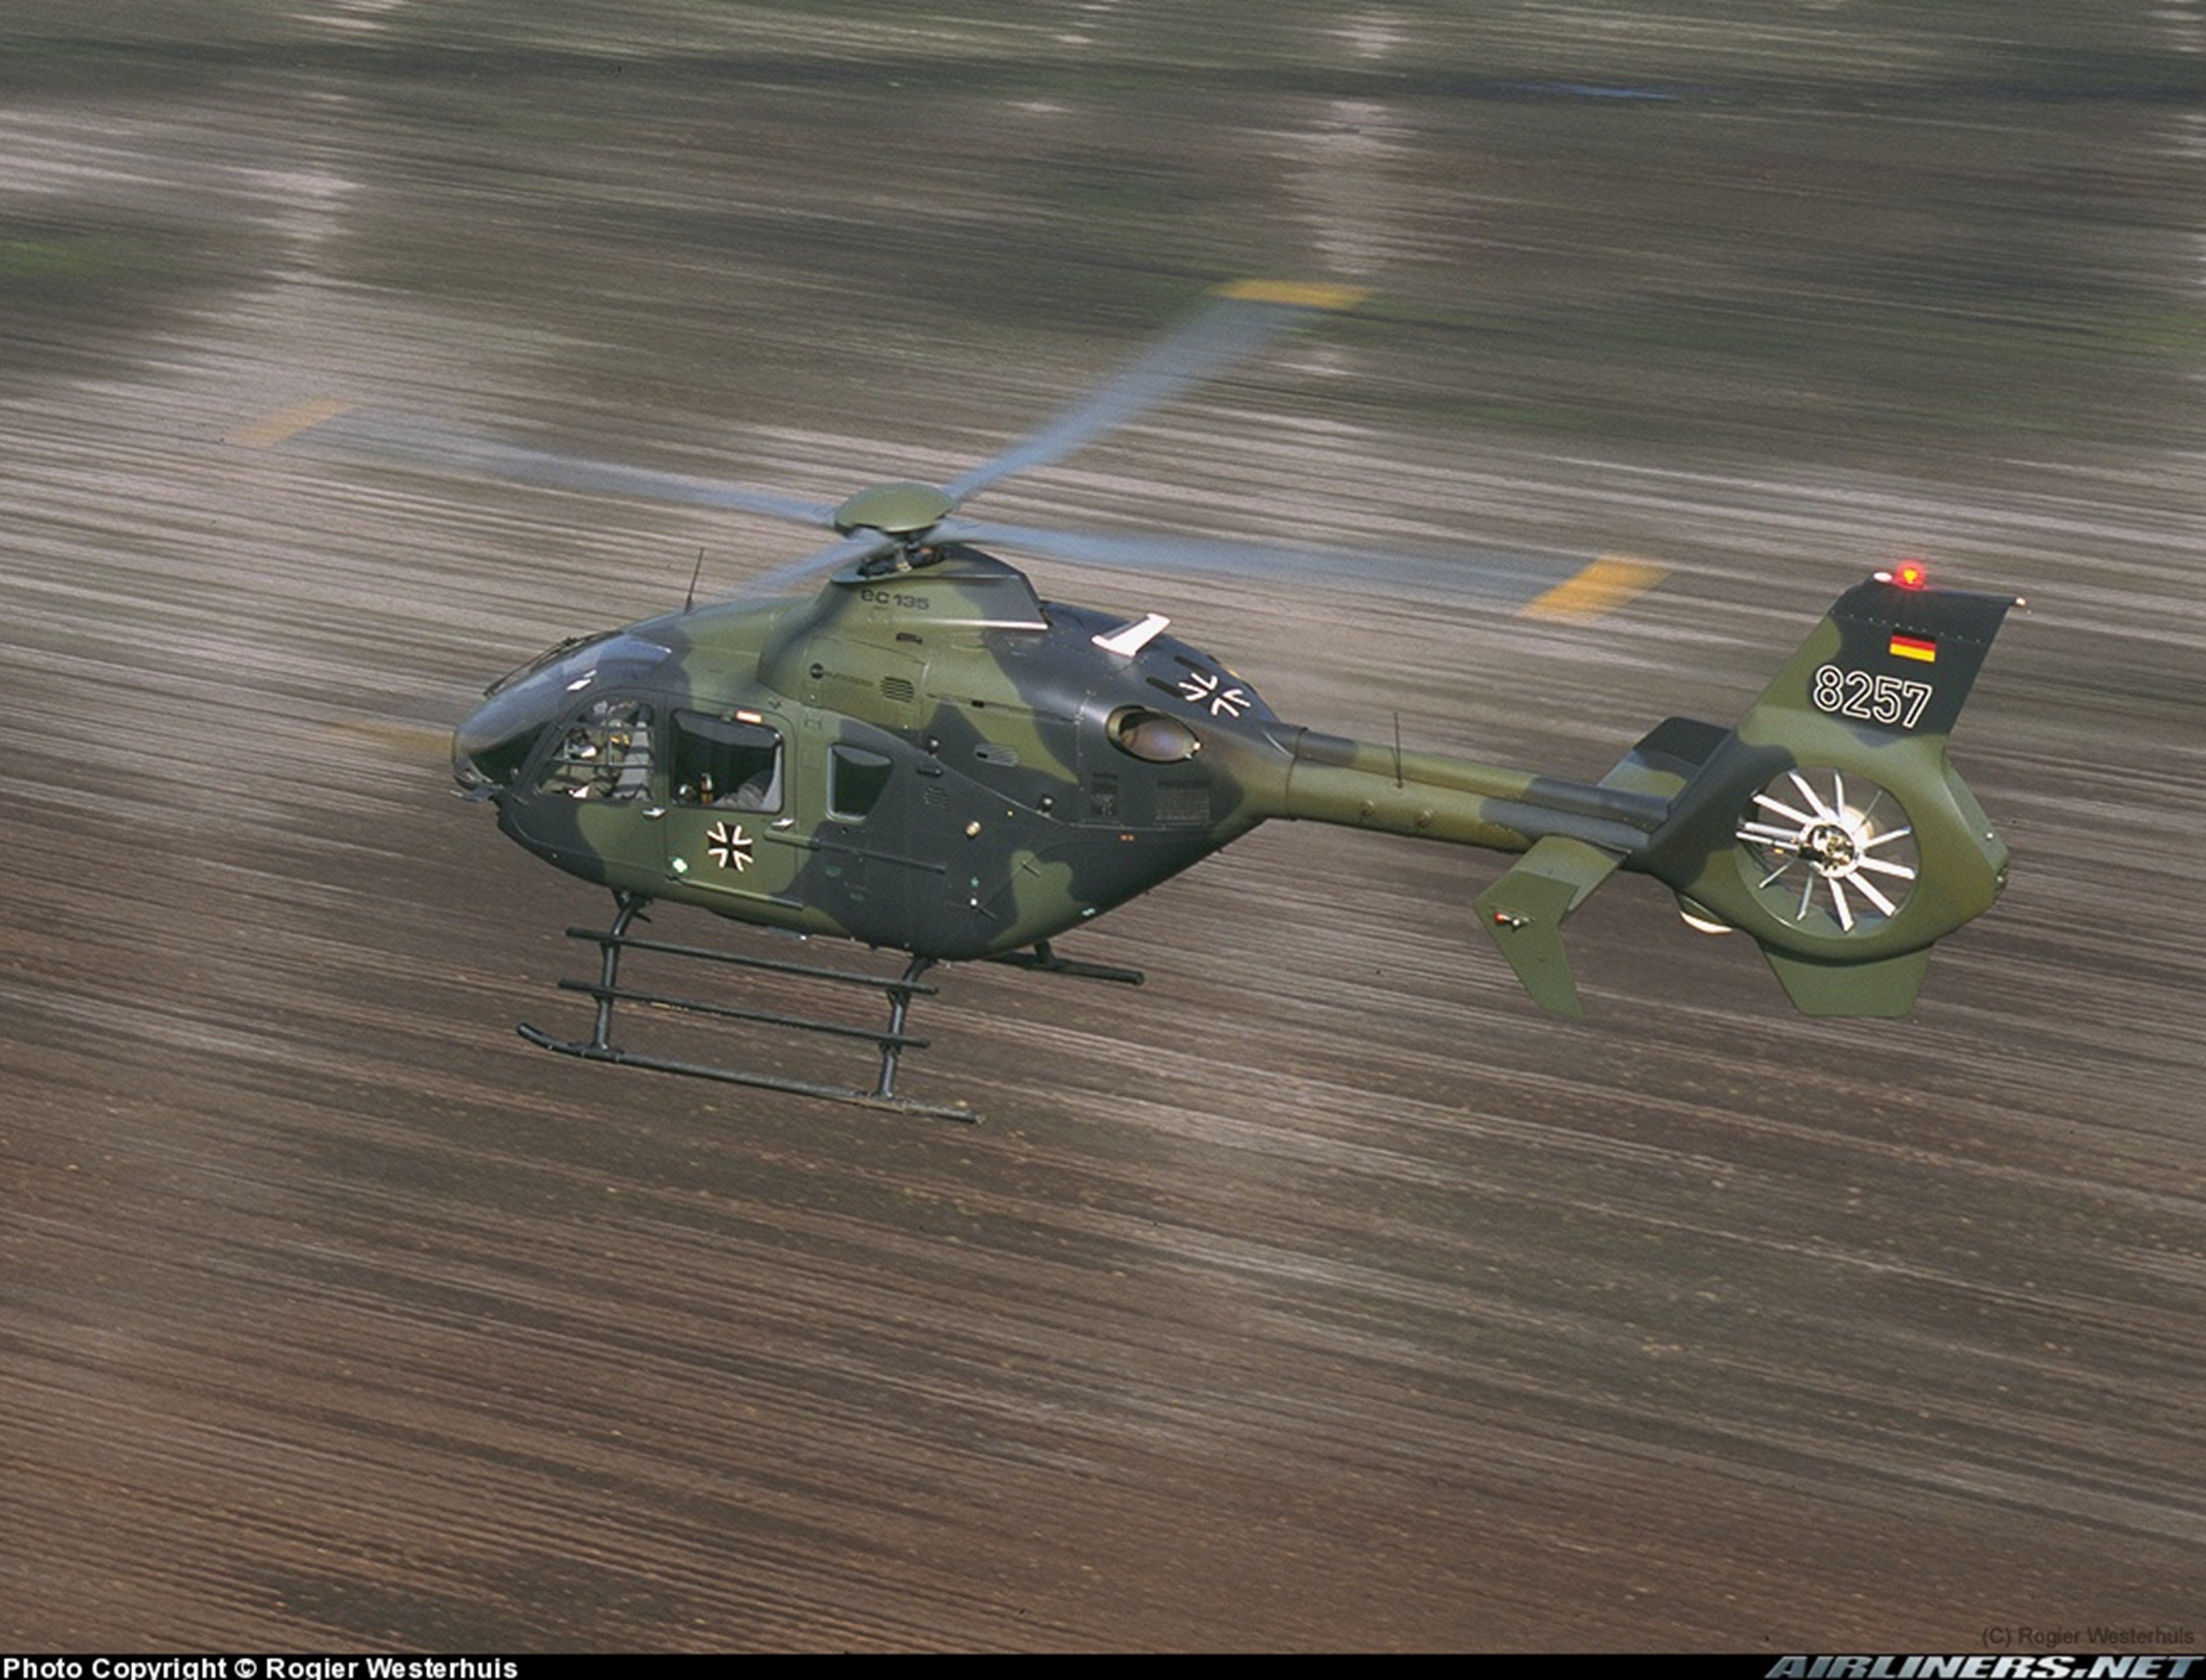 helicopter, Aircraft, Eurocopter, Ec 135, Germany, Military, Arm Wallpaper